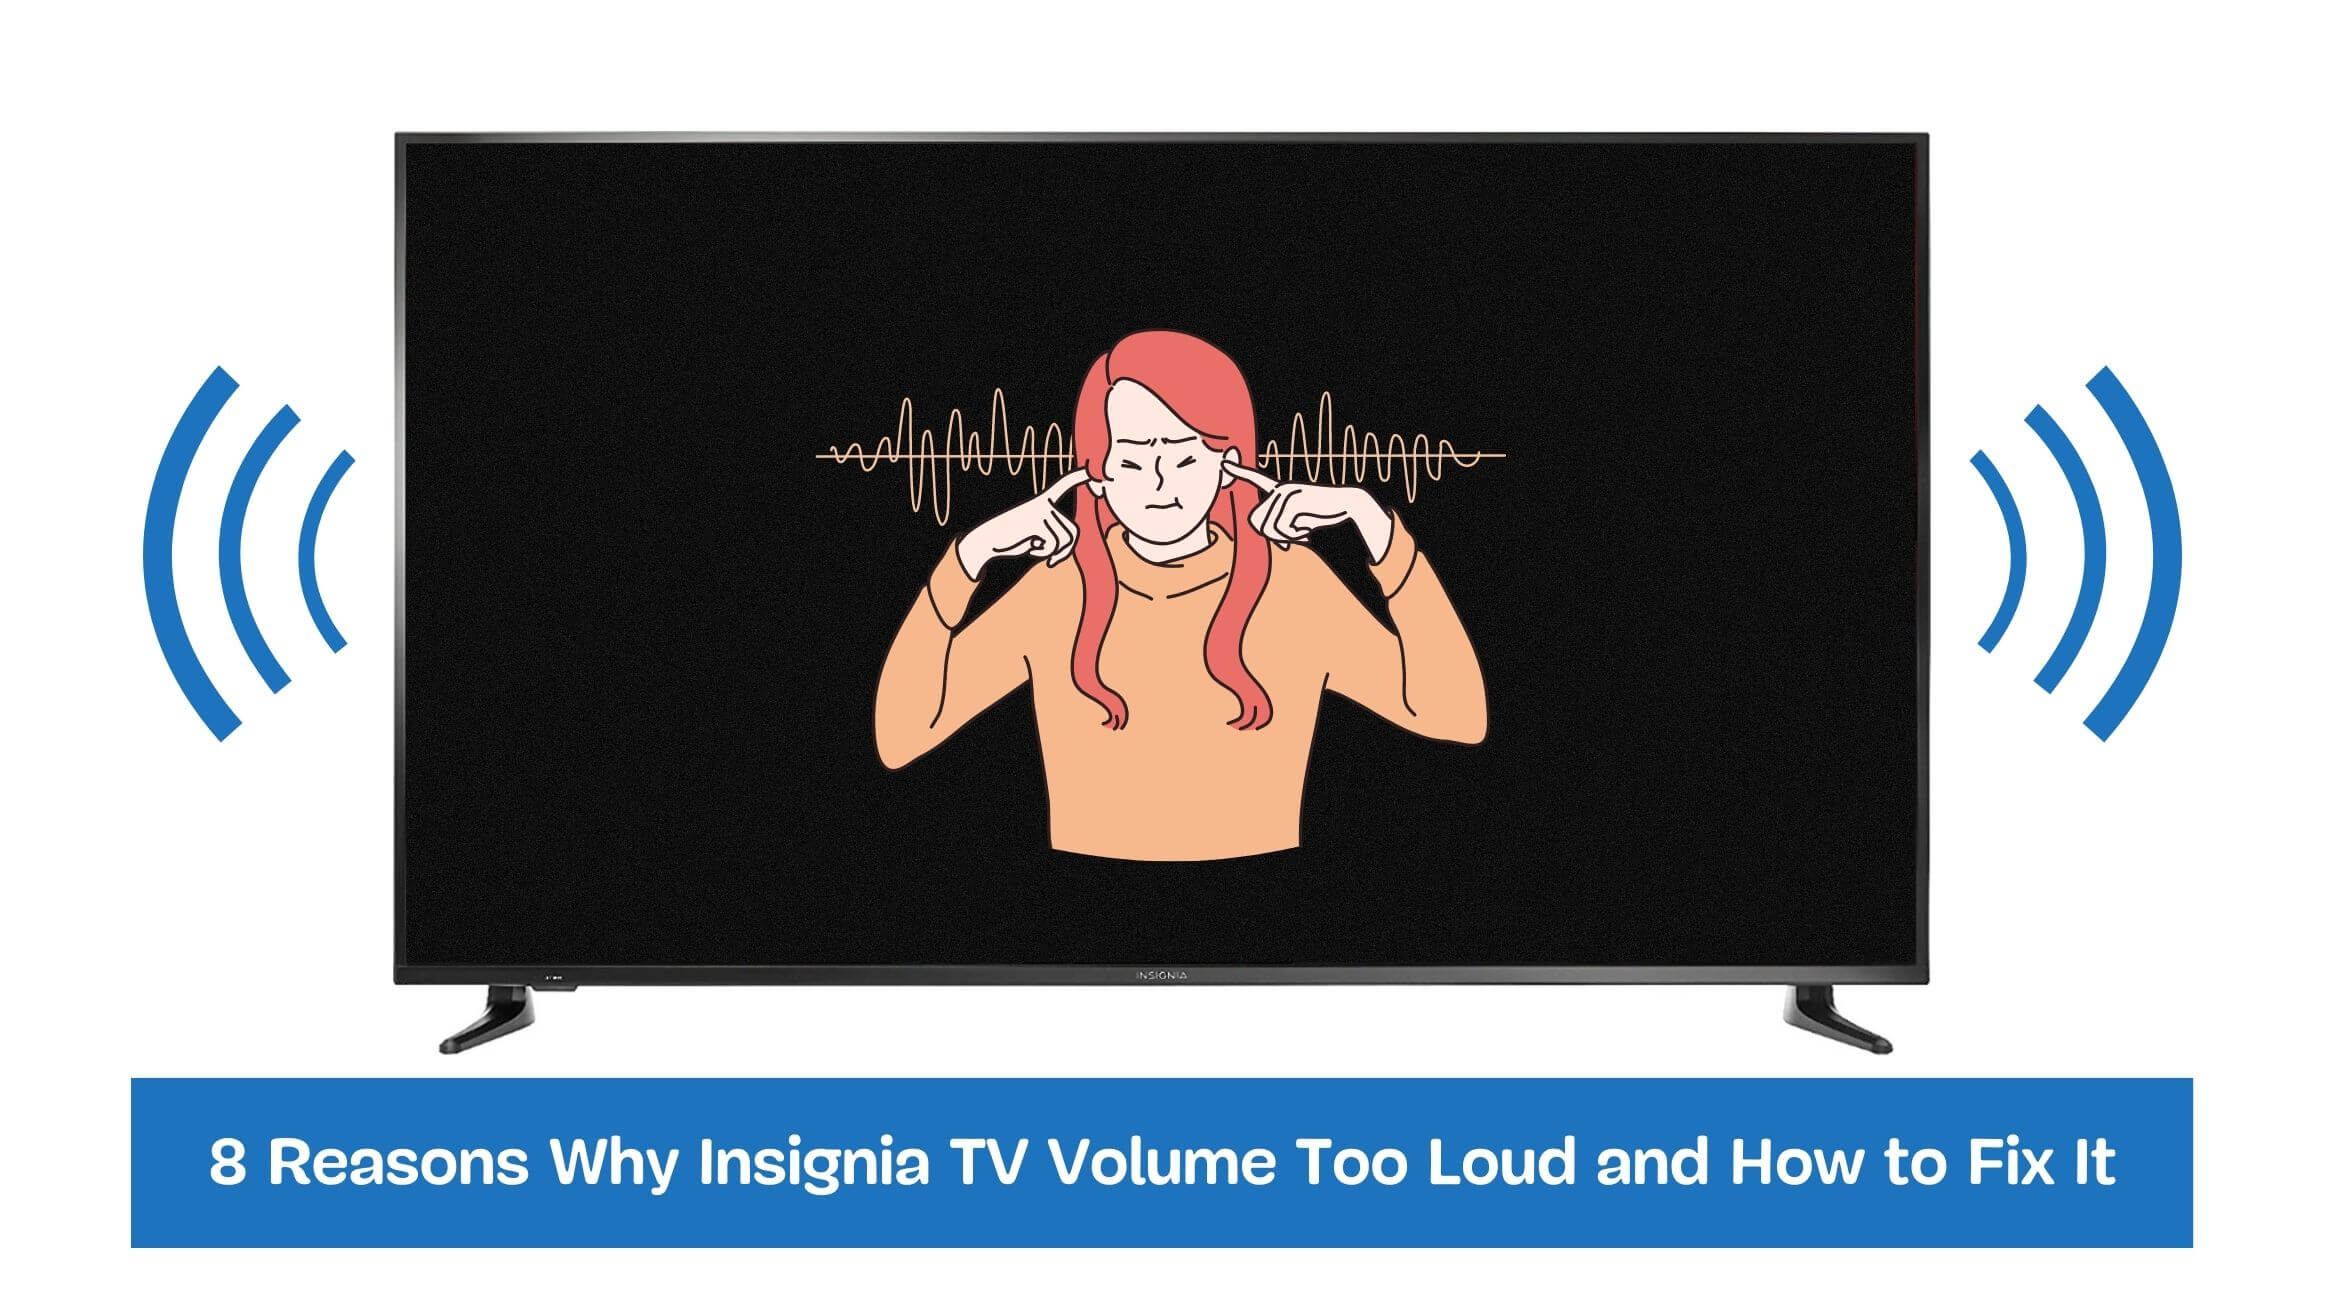 8 Reasons Why Insignia TV Volume Too Loud and How to Fix It